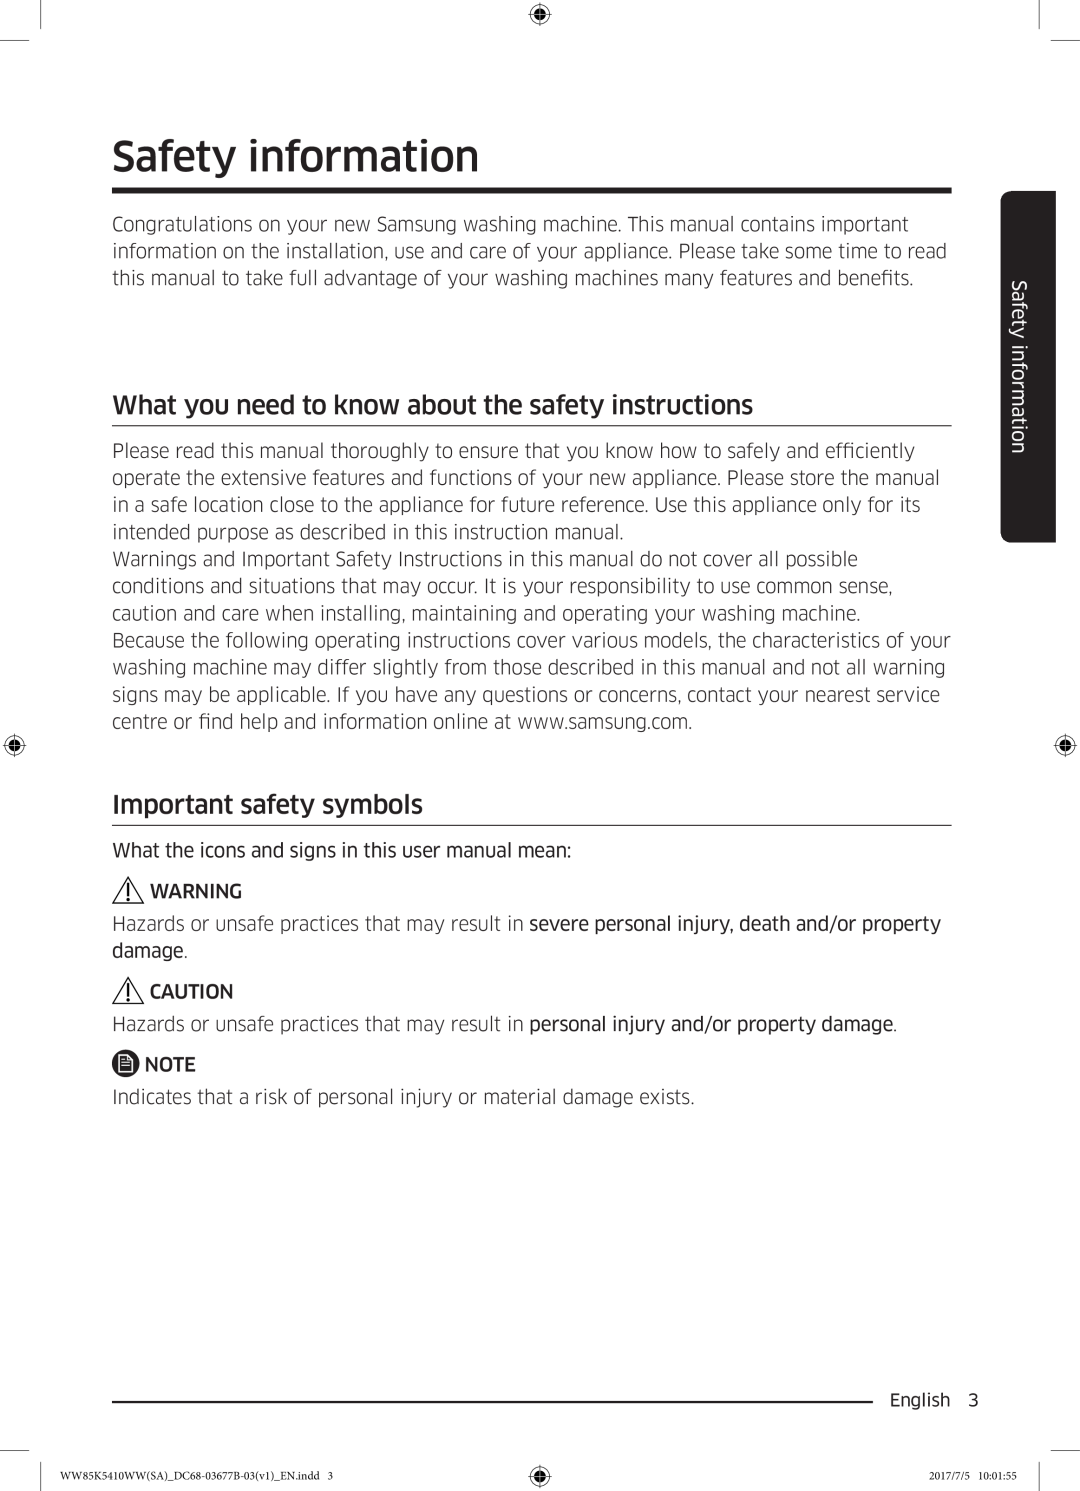 Samsung WW90K5233WW/SV Safety information, What you need to know about the safety instructions, Important safety symbols 